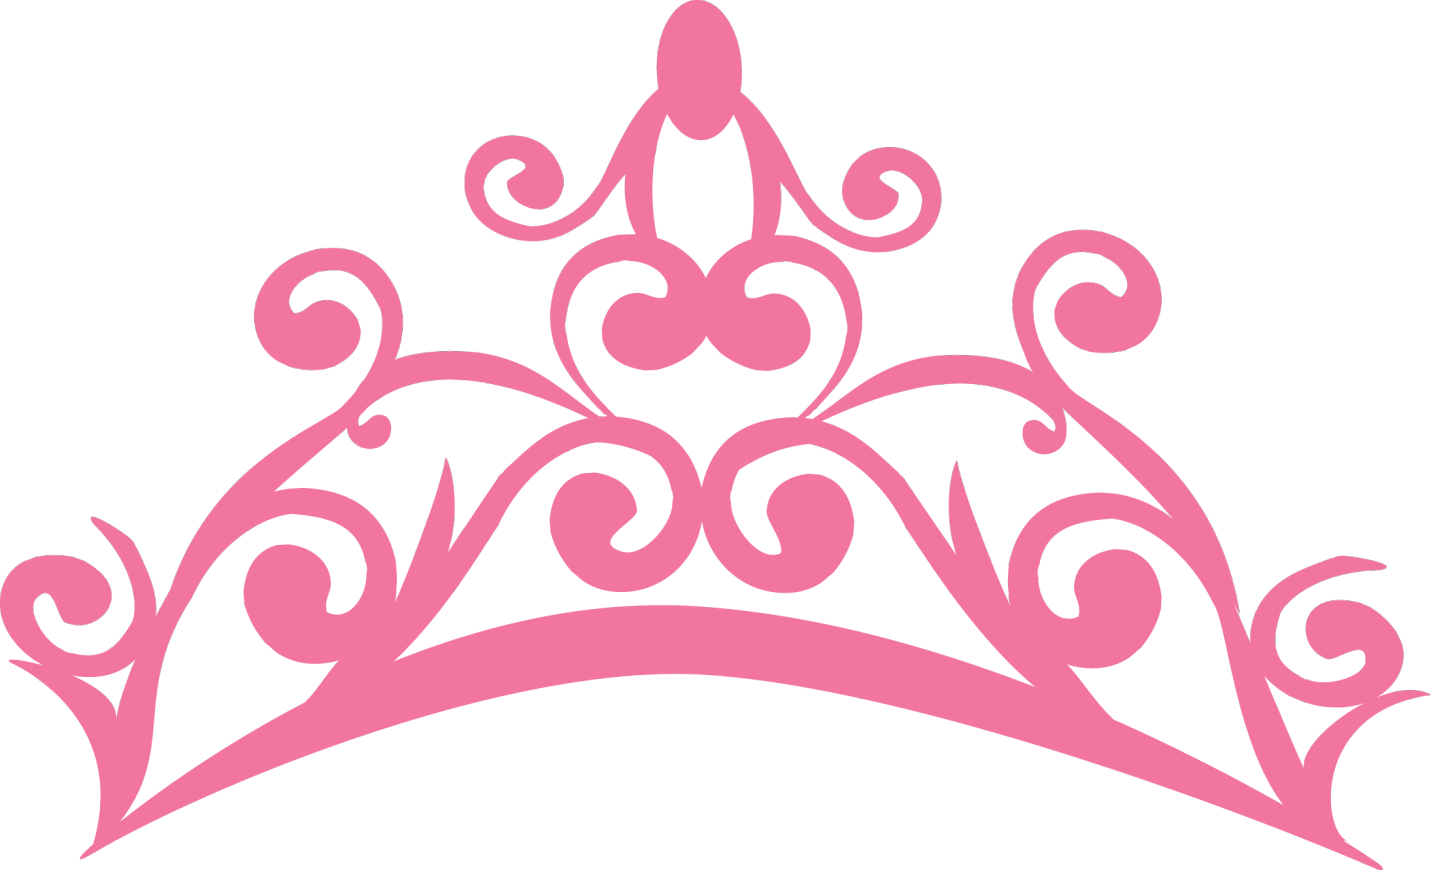 Queen crown free clipart 